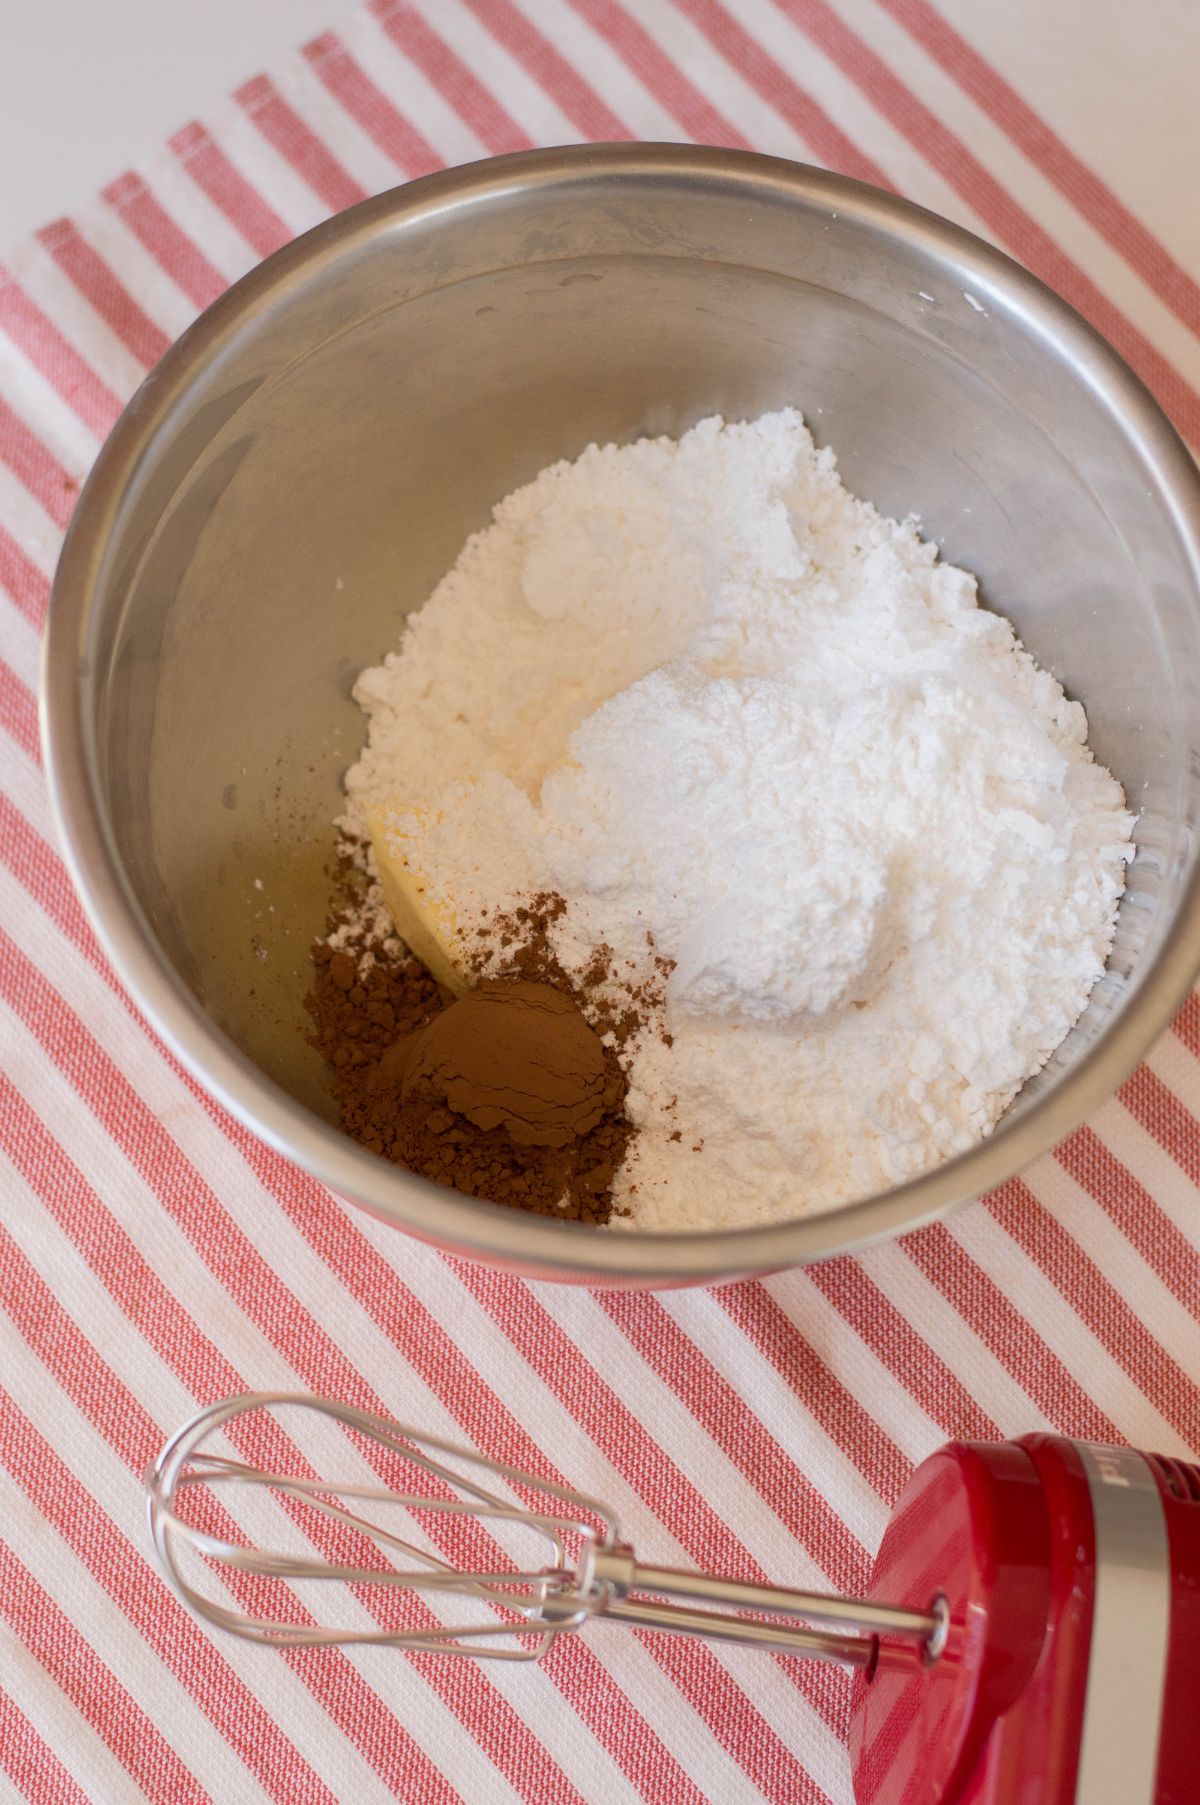 butter, confectioners’ sugar, cocoa powder, and milk in a large mixing bowl.